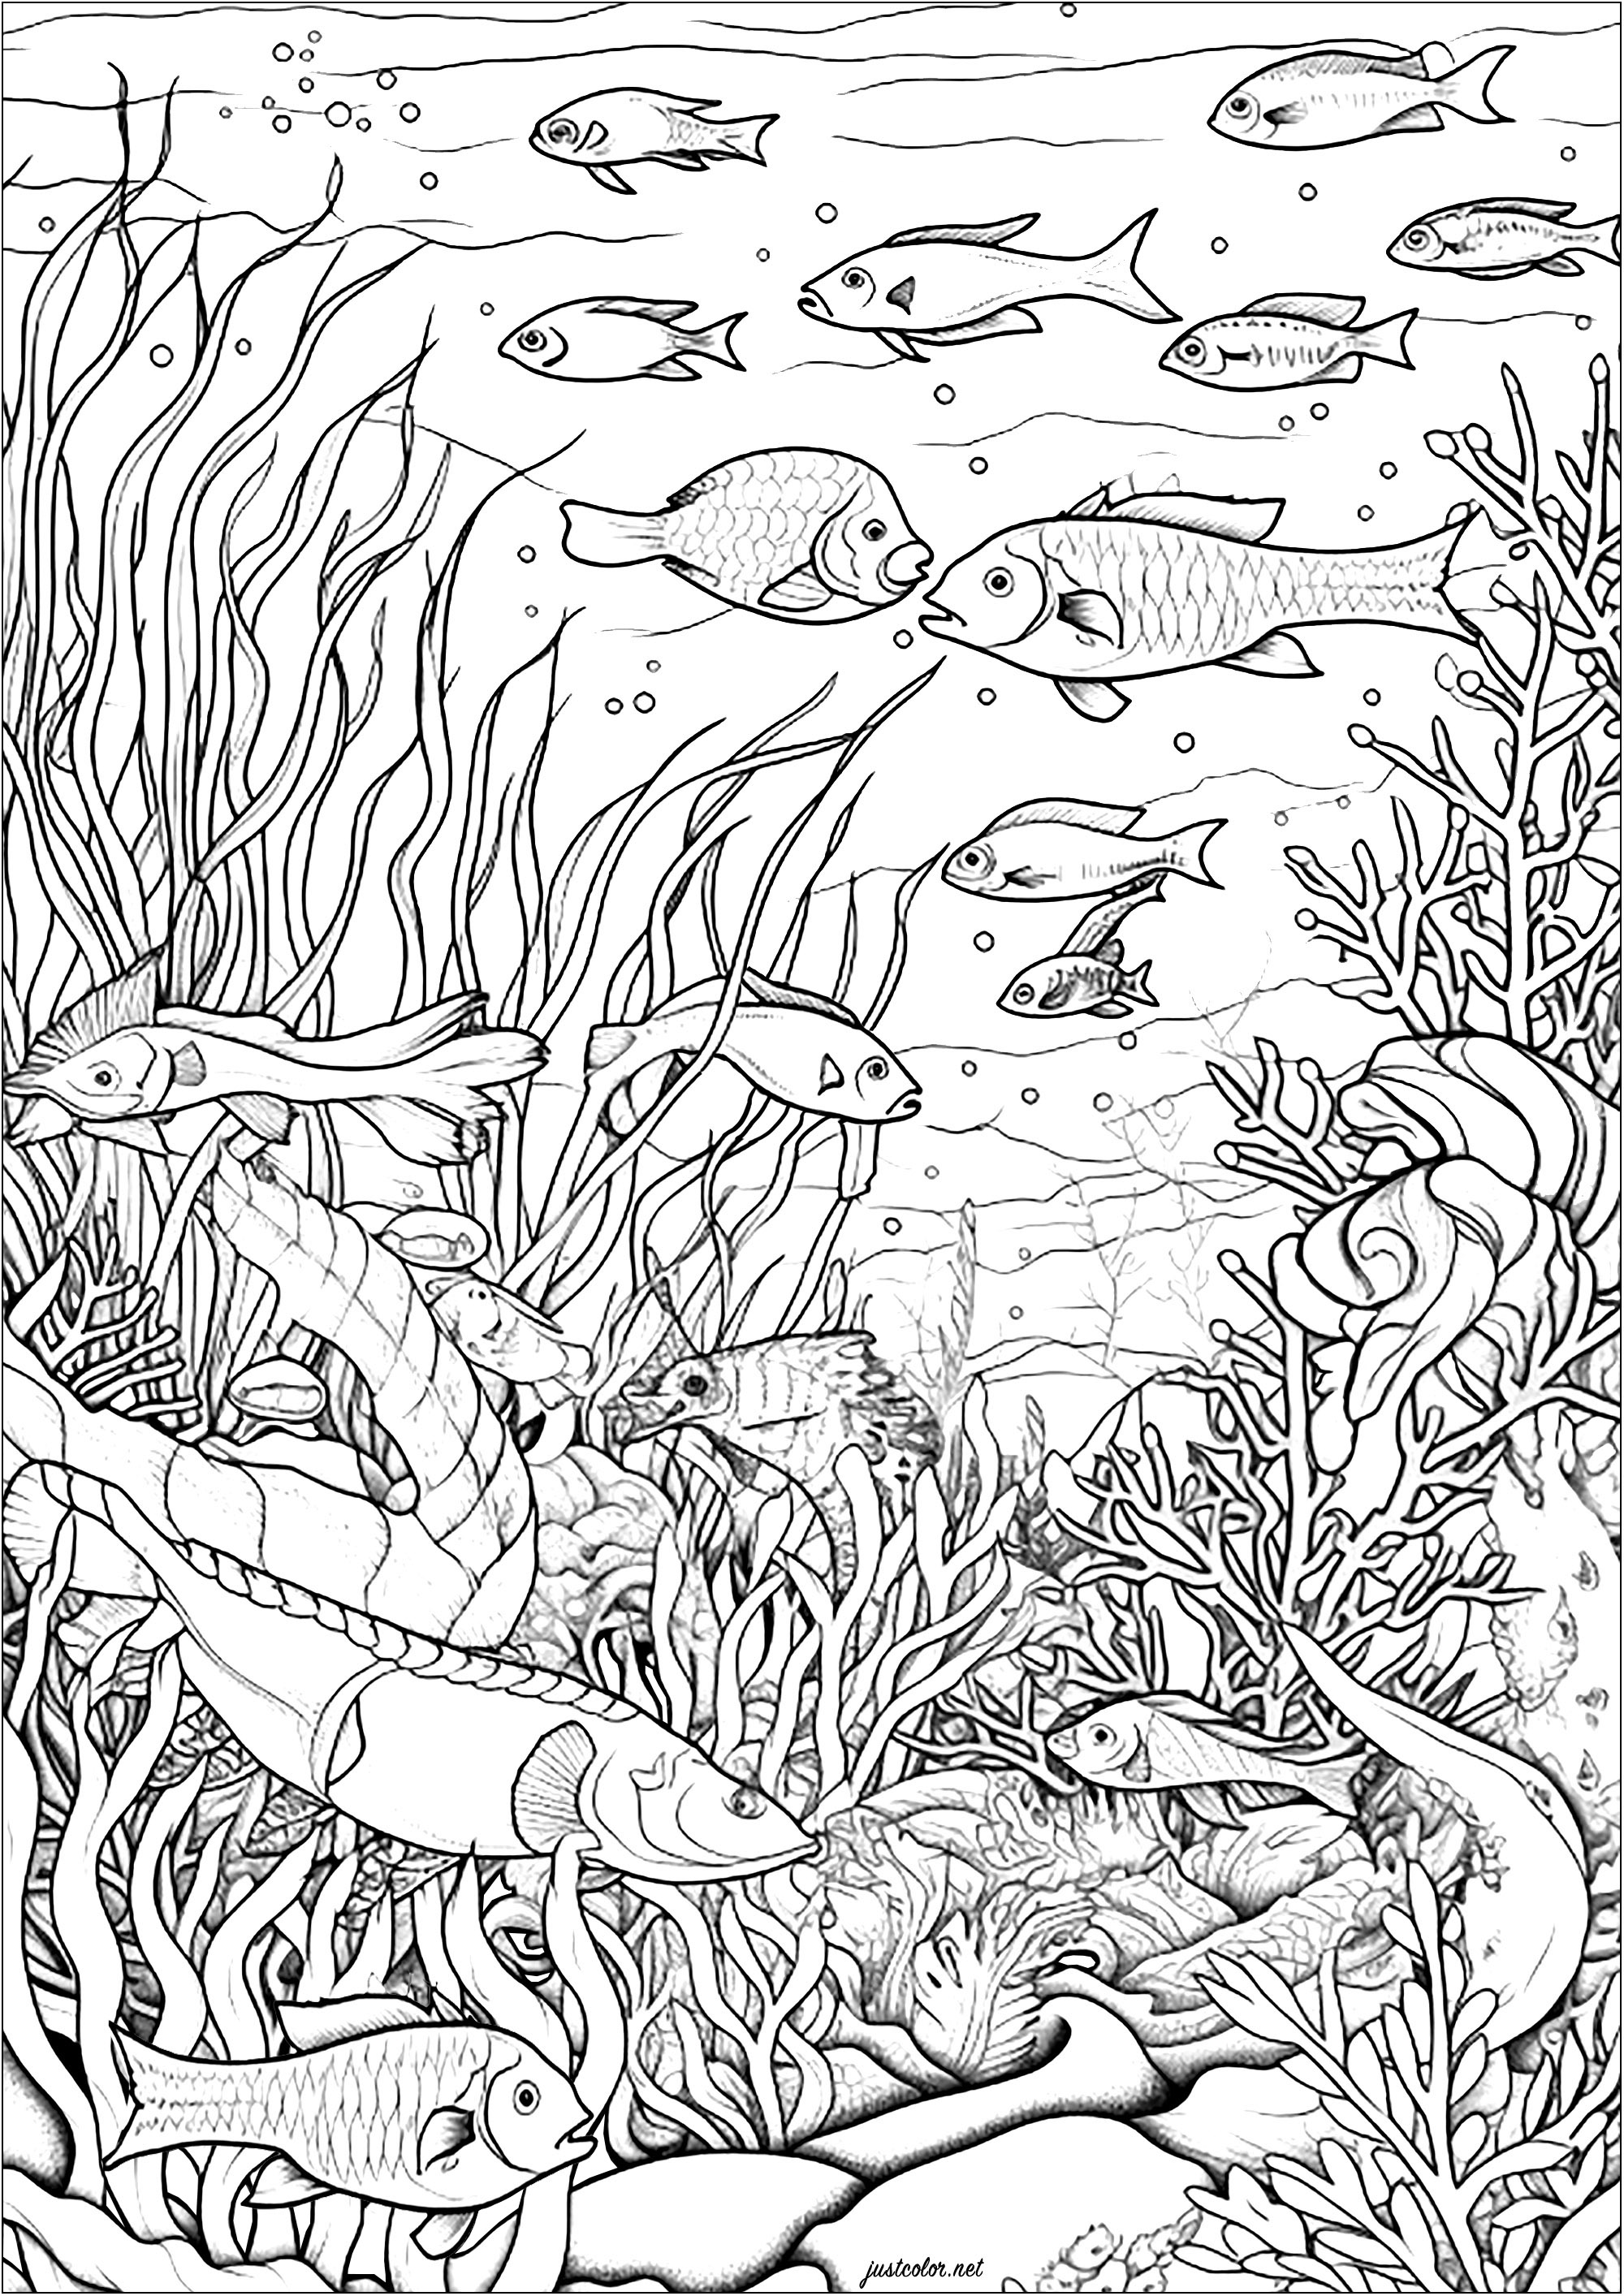 Fish and seaweed. This coloring page is a wonderful aquatic painting.
